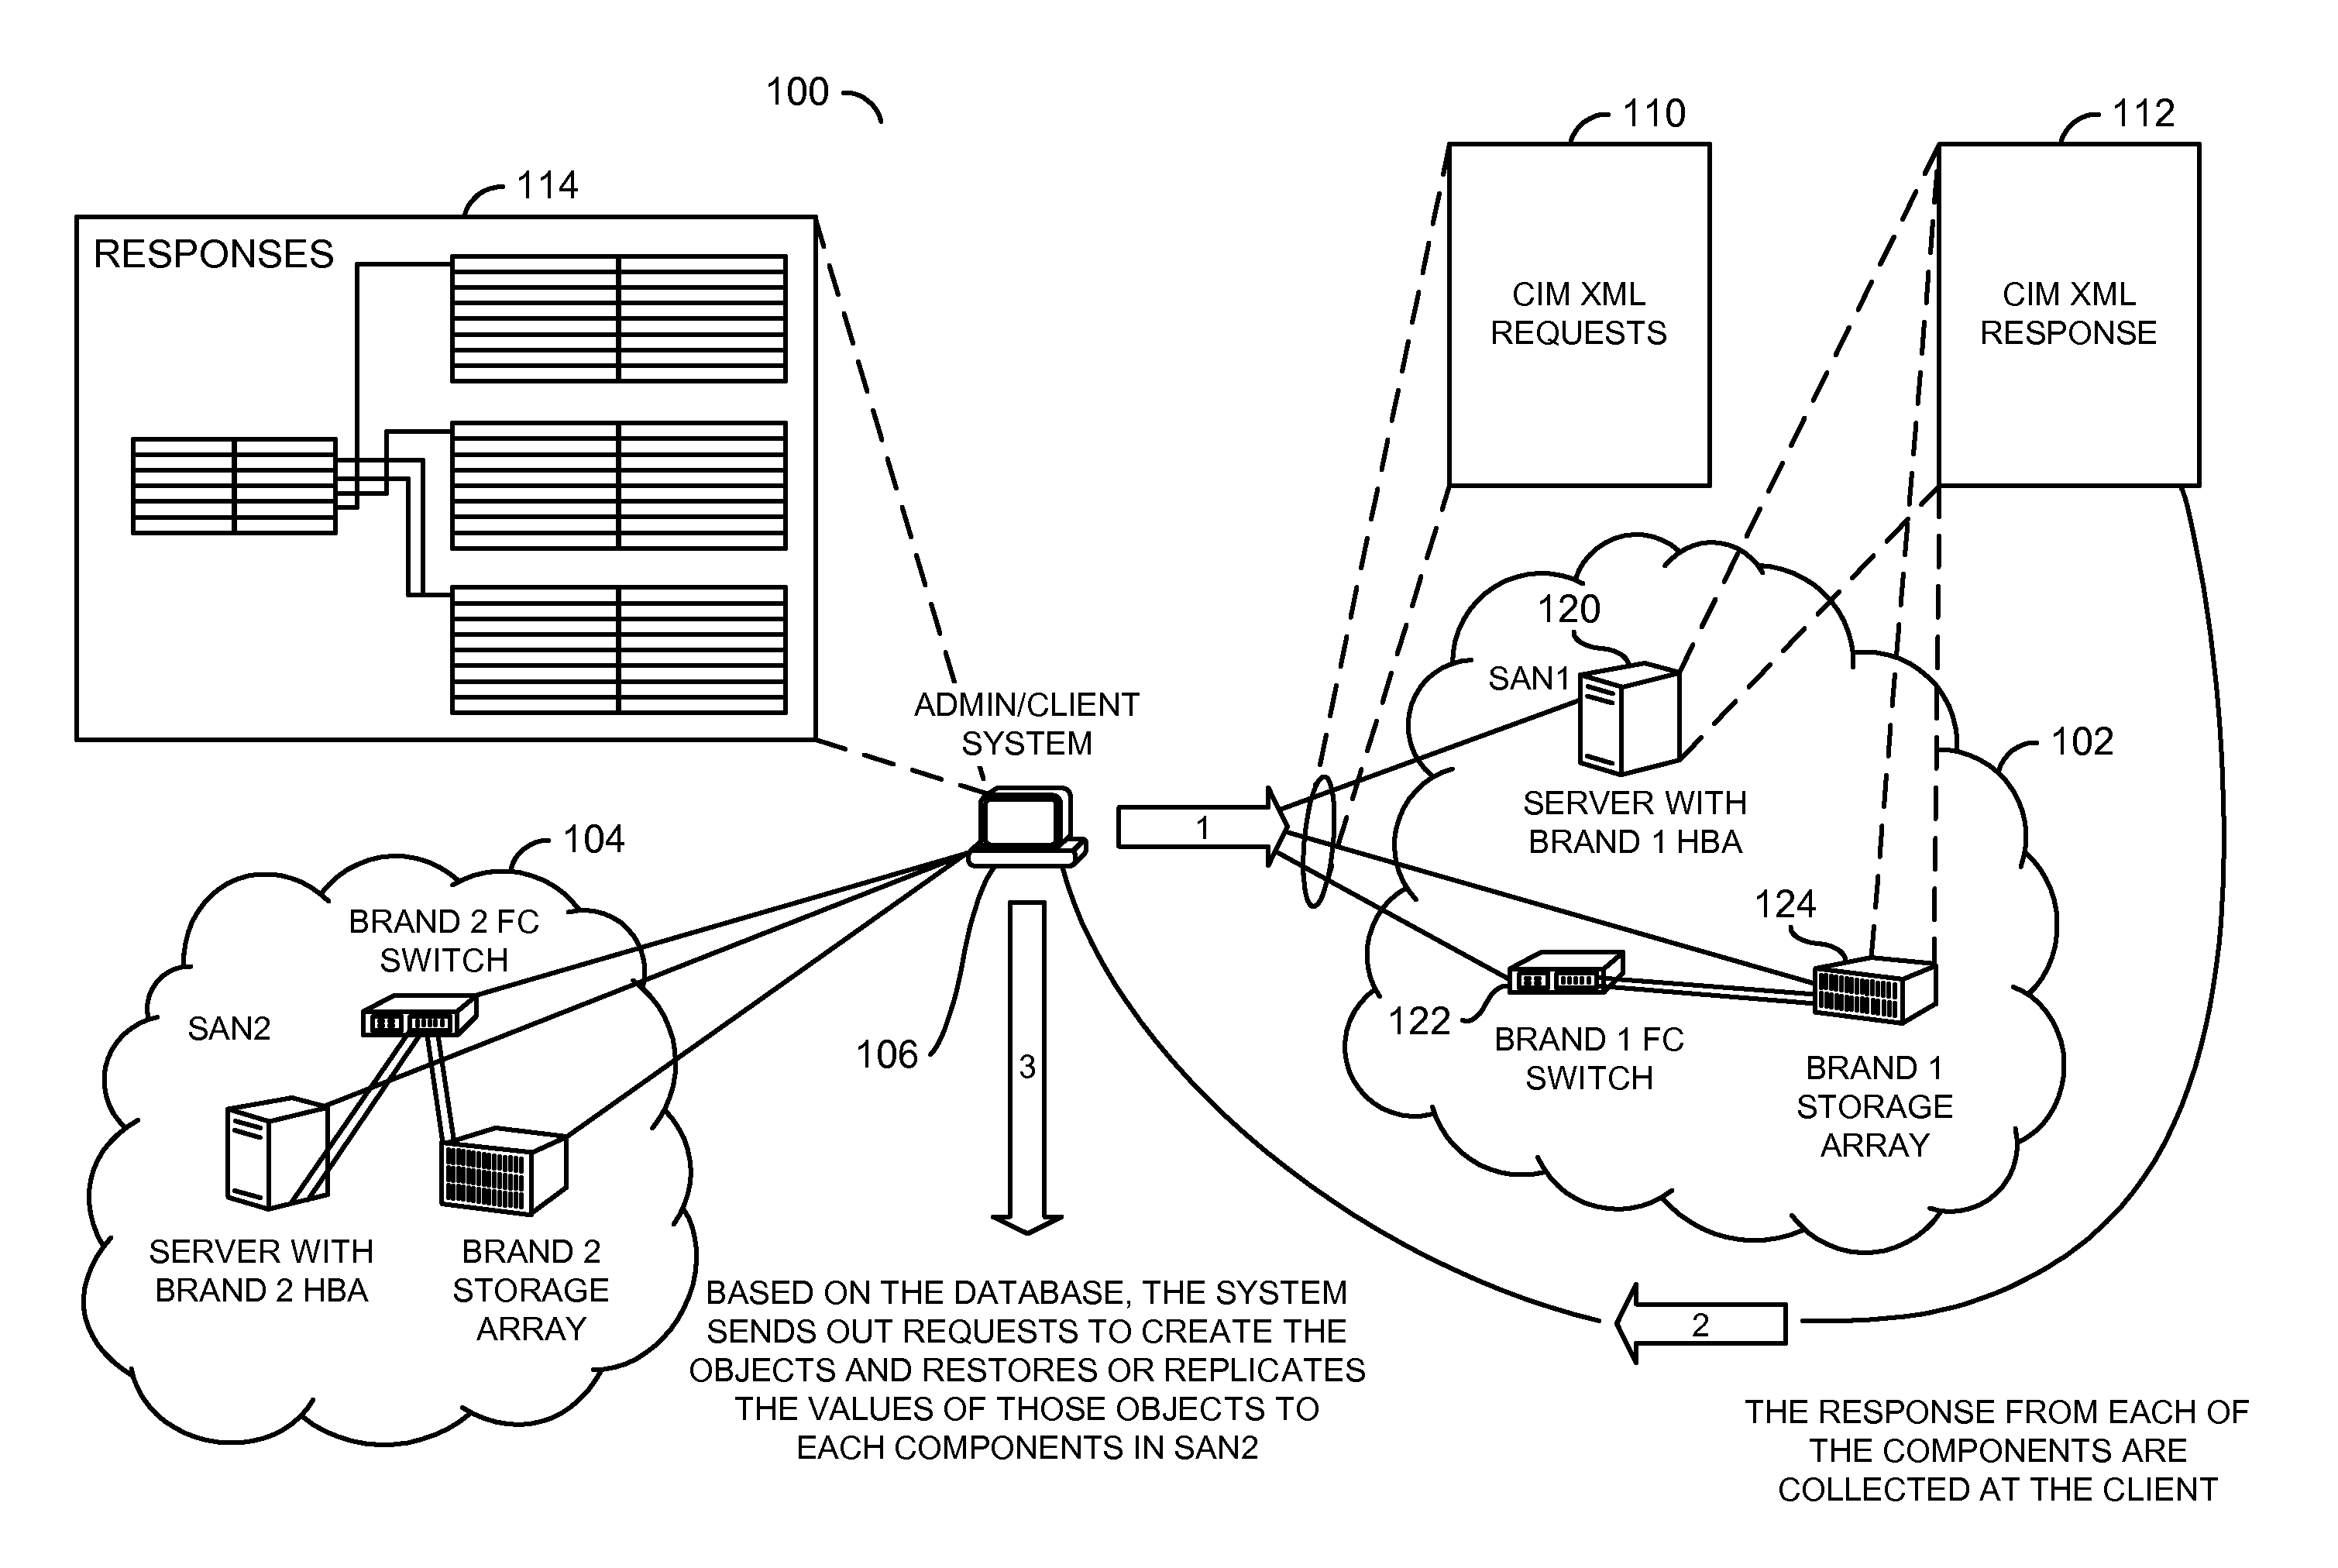 Backup, restore, and/or replication of configuration settings in a storage area network environment using a management interface